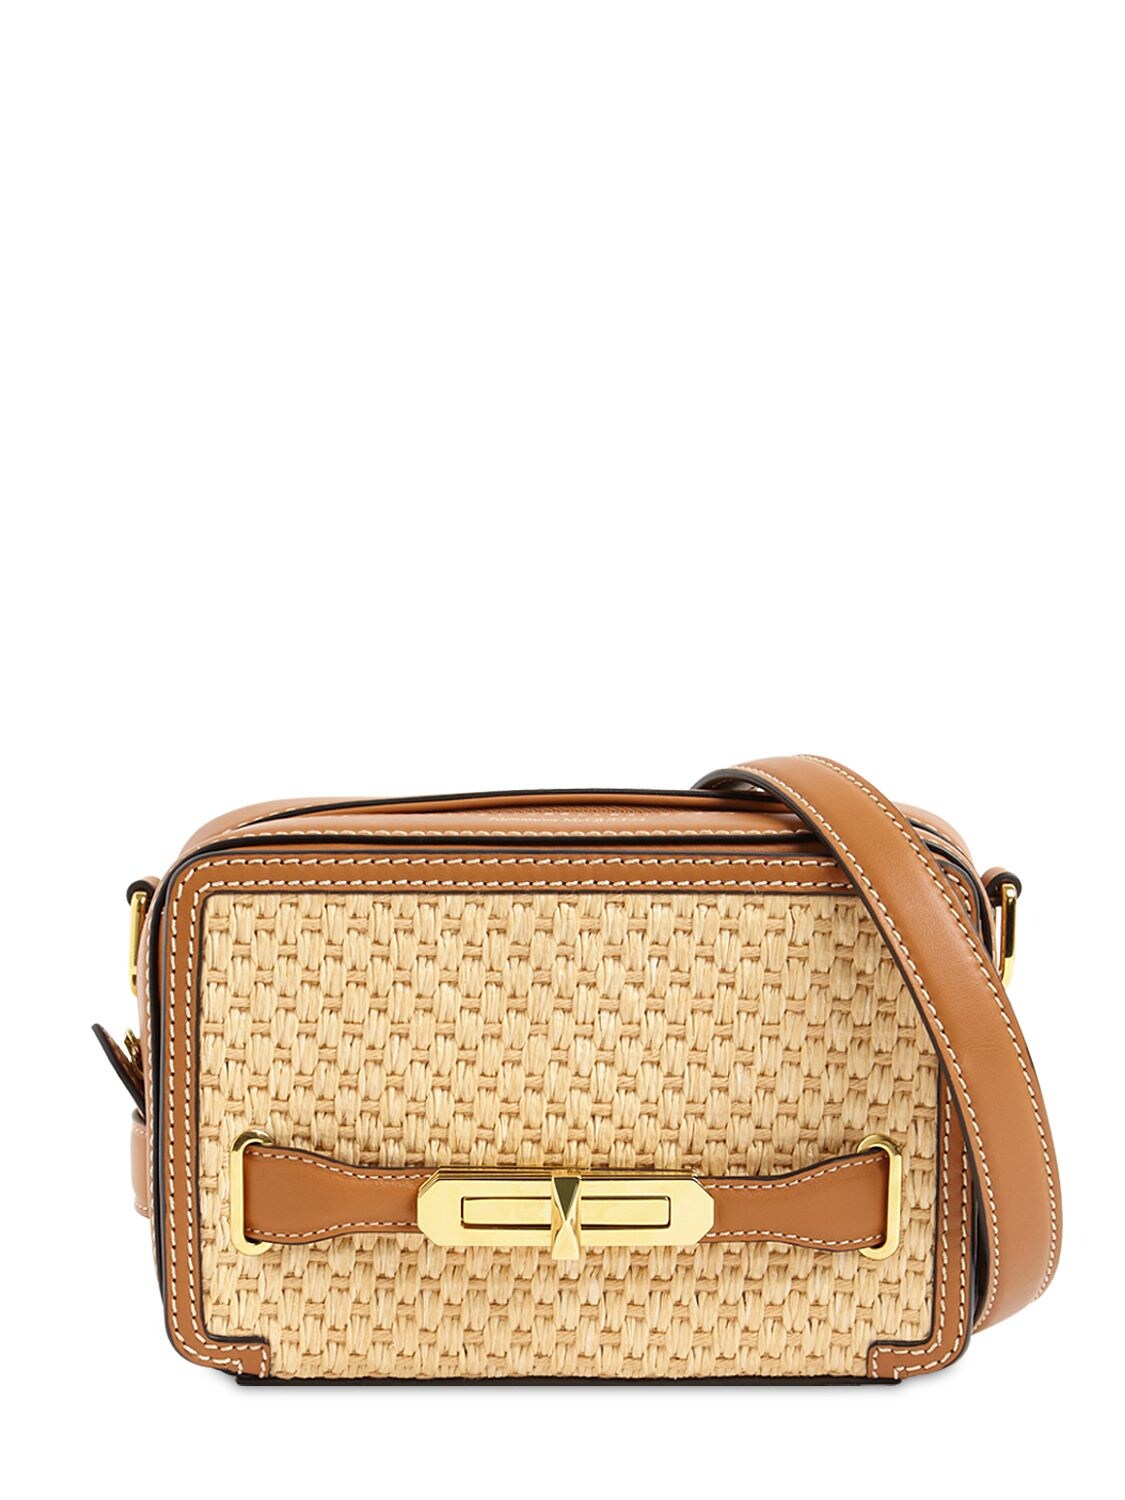 Alexander Mcqueen Myth Woven Viscose & Leather Bag In Natural